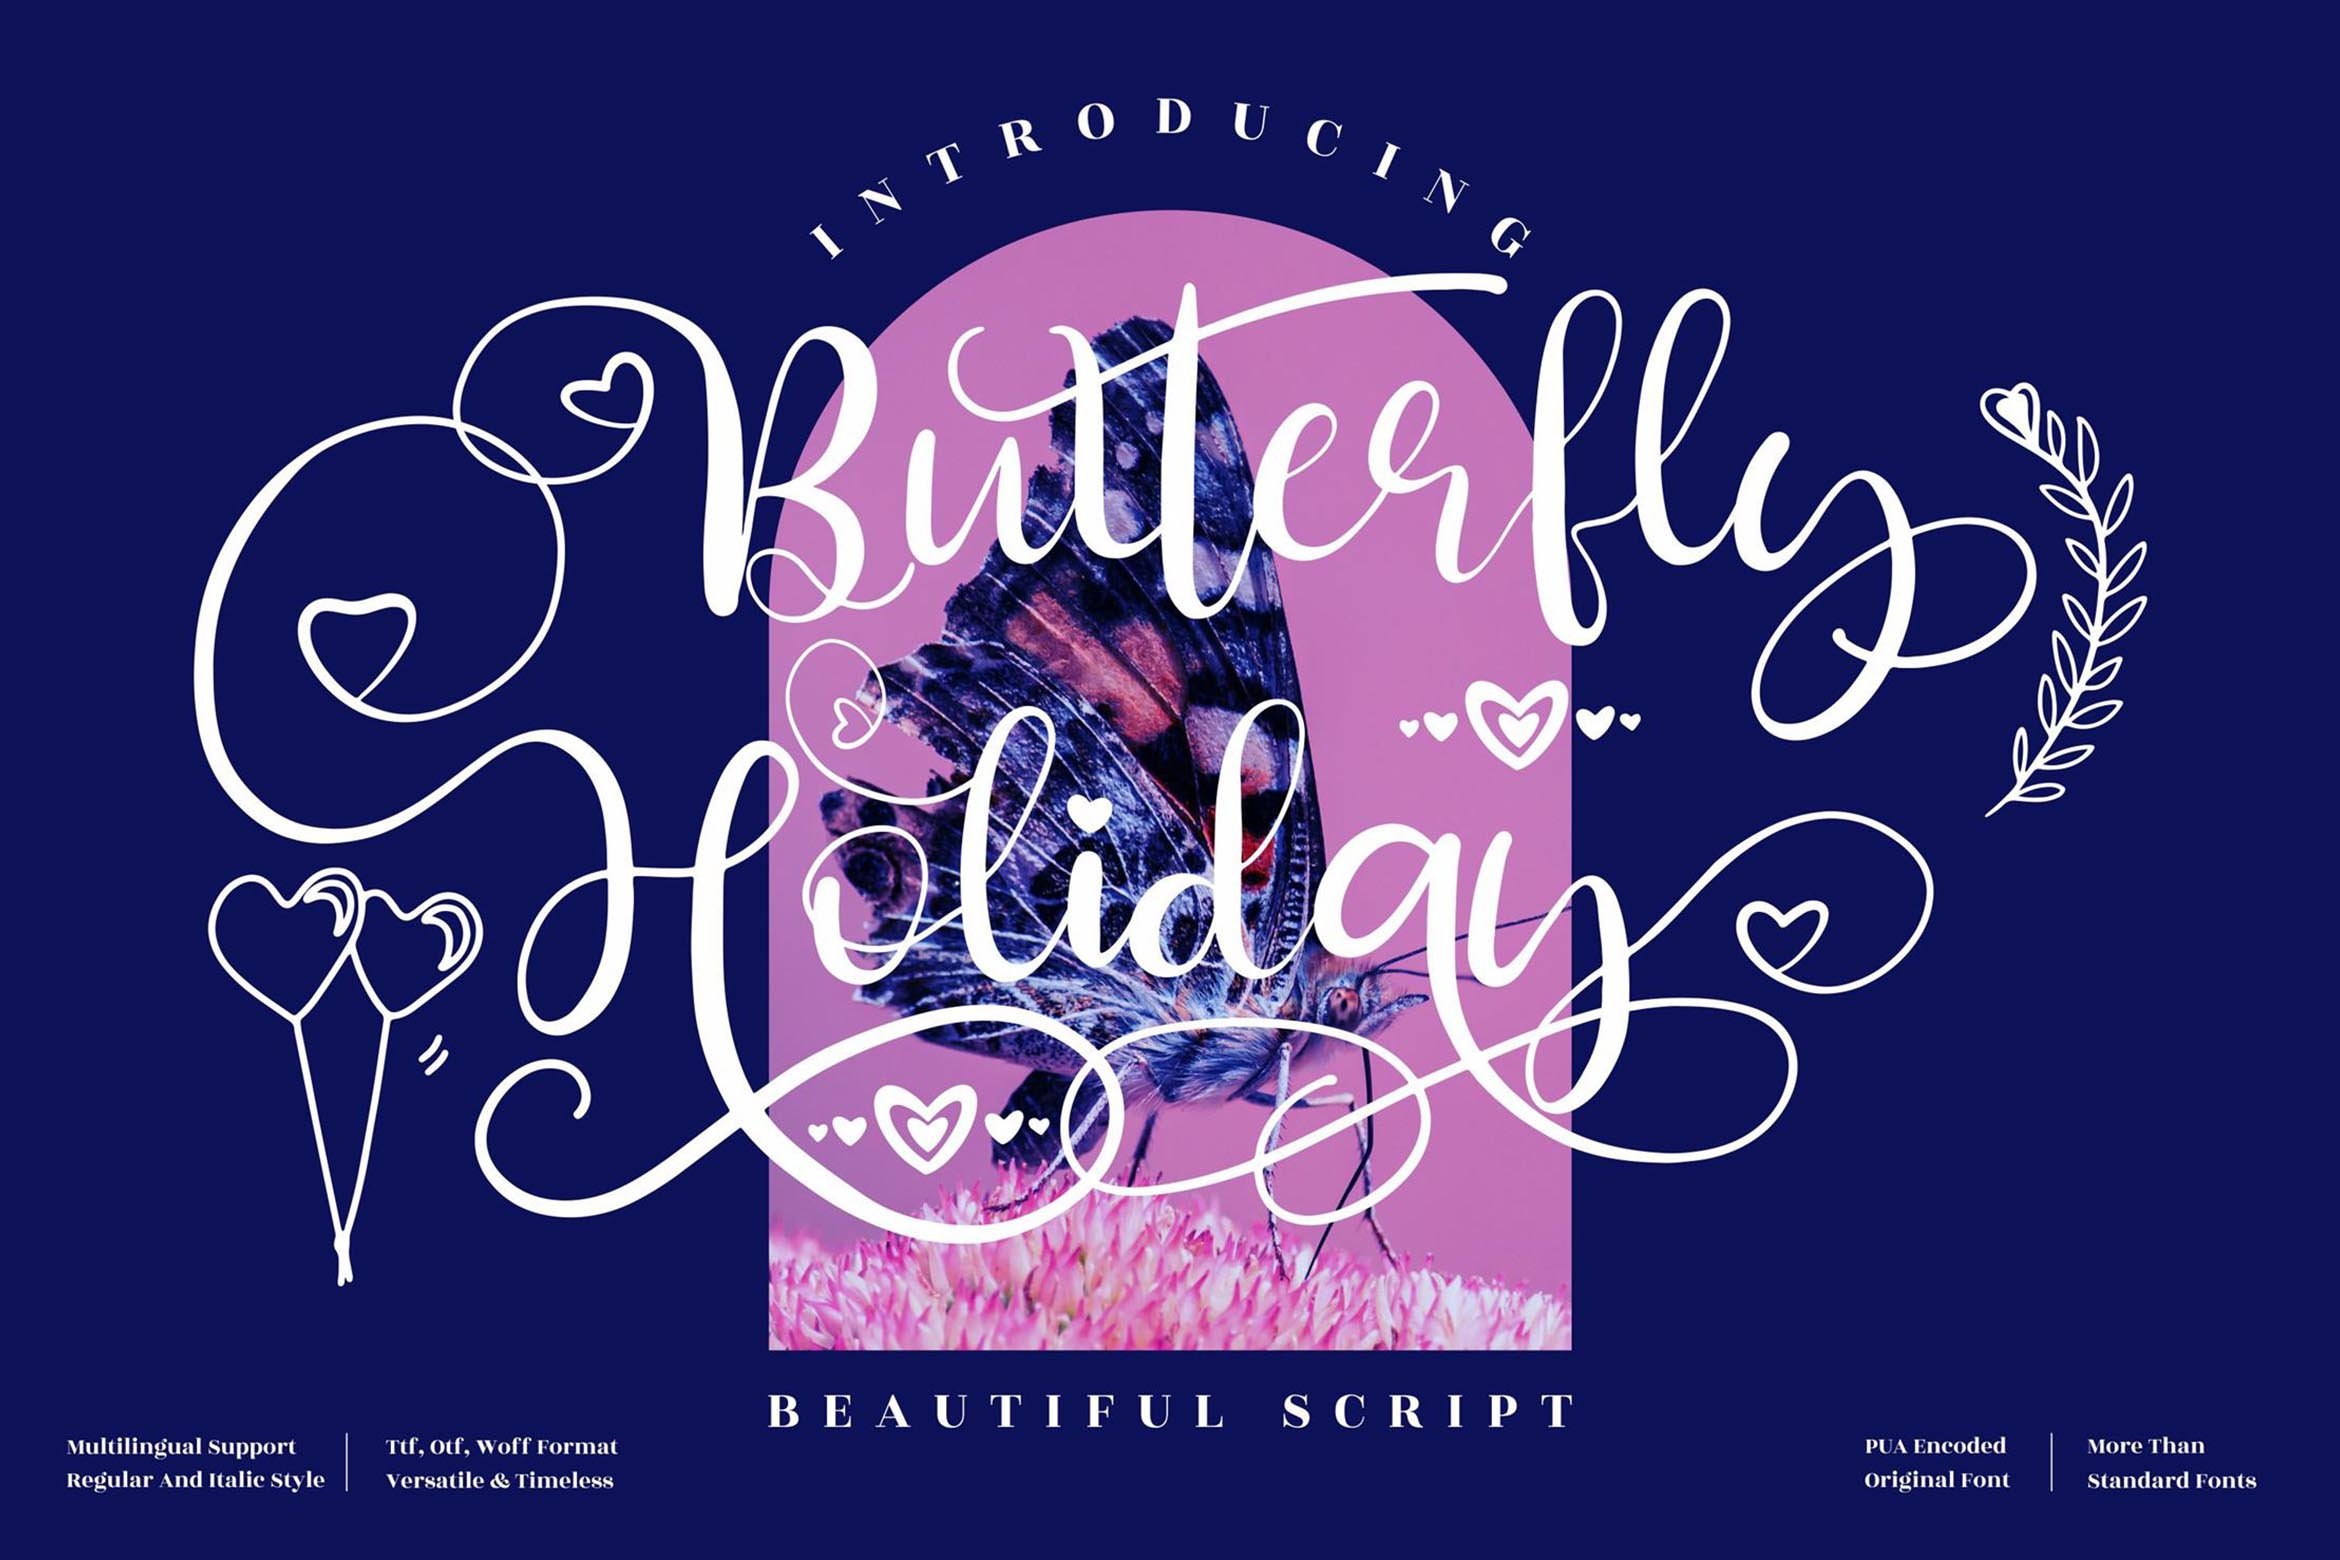 Butterfly Holiday Script LS cover image.